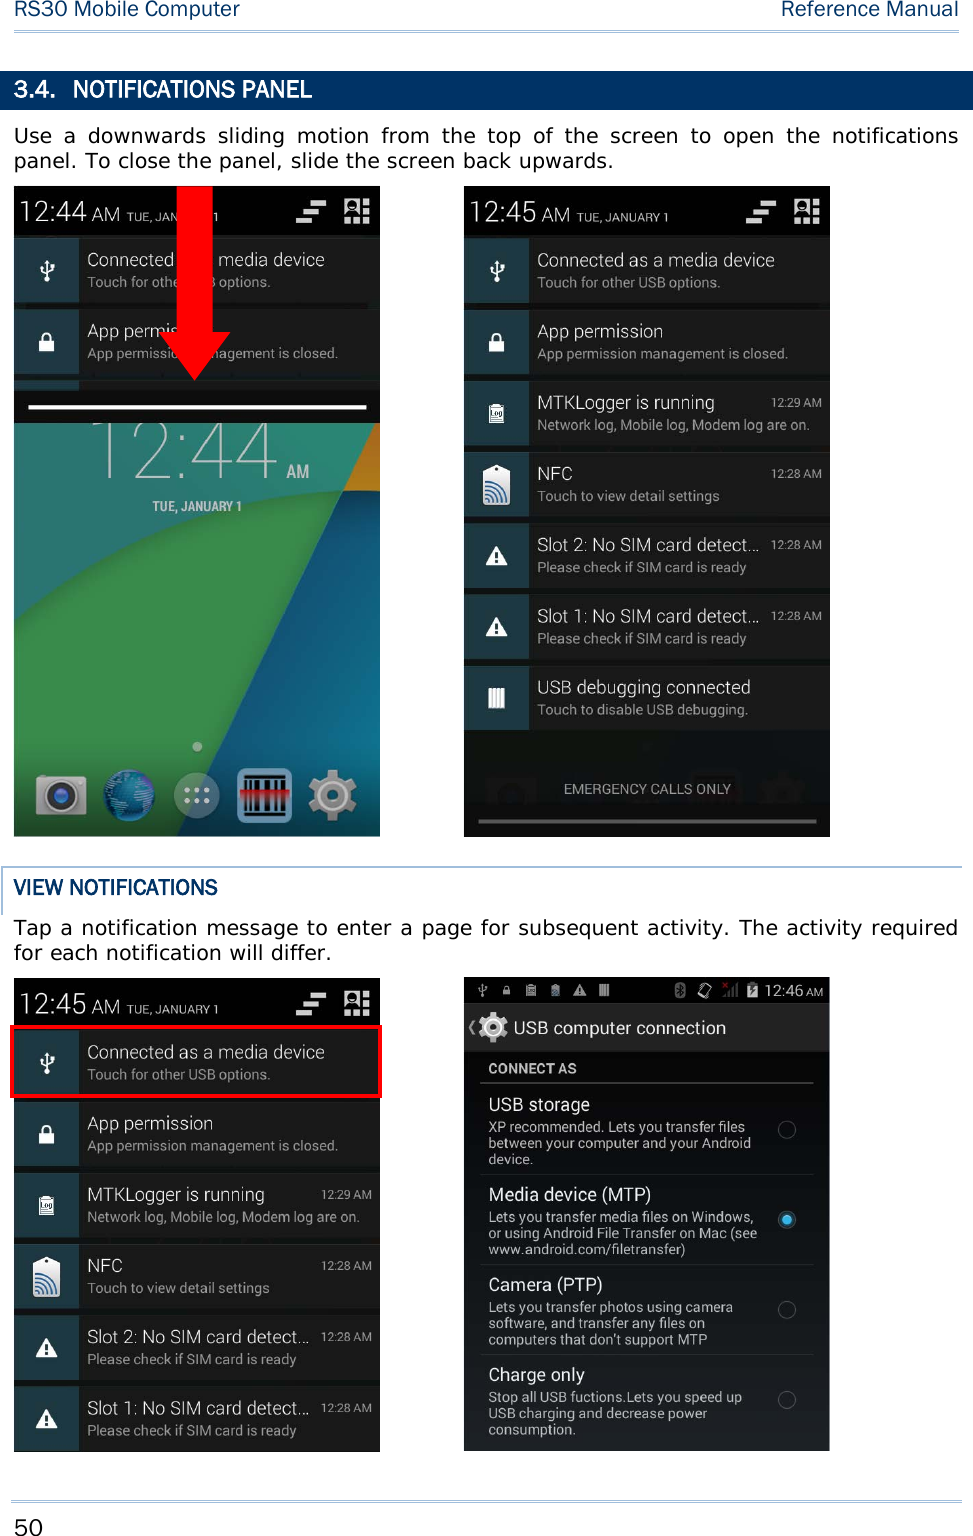 RS30 Mobile Computer    Reference Manual  3.4. NOTIFICATIONS PANEL Use a downwards  sliding motion from the top of the screen to open the notifications panel. To close the panel, slide the screen back upwards.      VIEW NOTIFICATIONS Tap a notification message to enter a page for subsequent activity. The activity required for each notification will differ.     50 